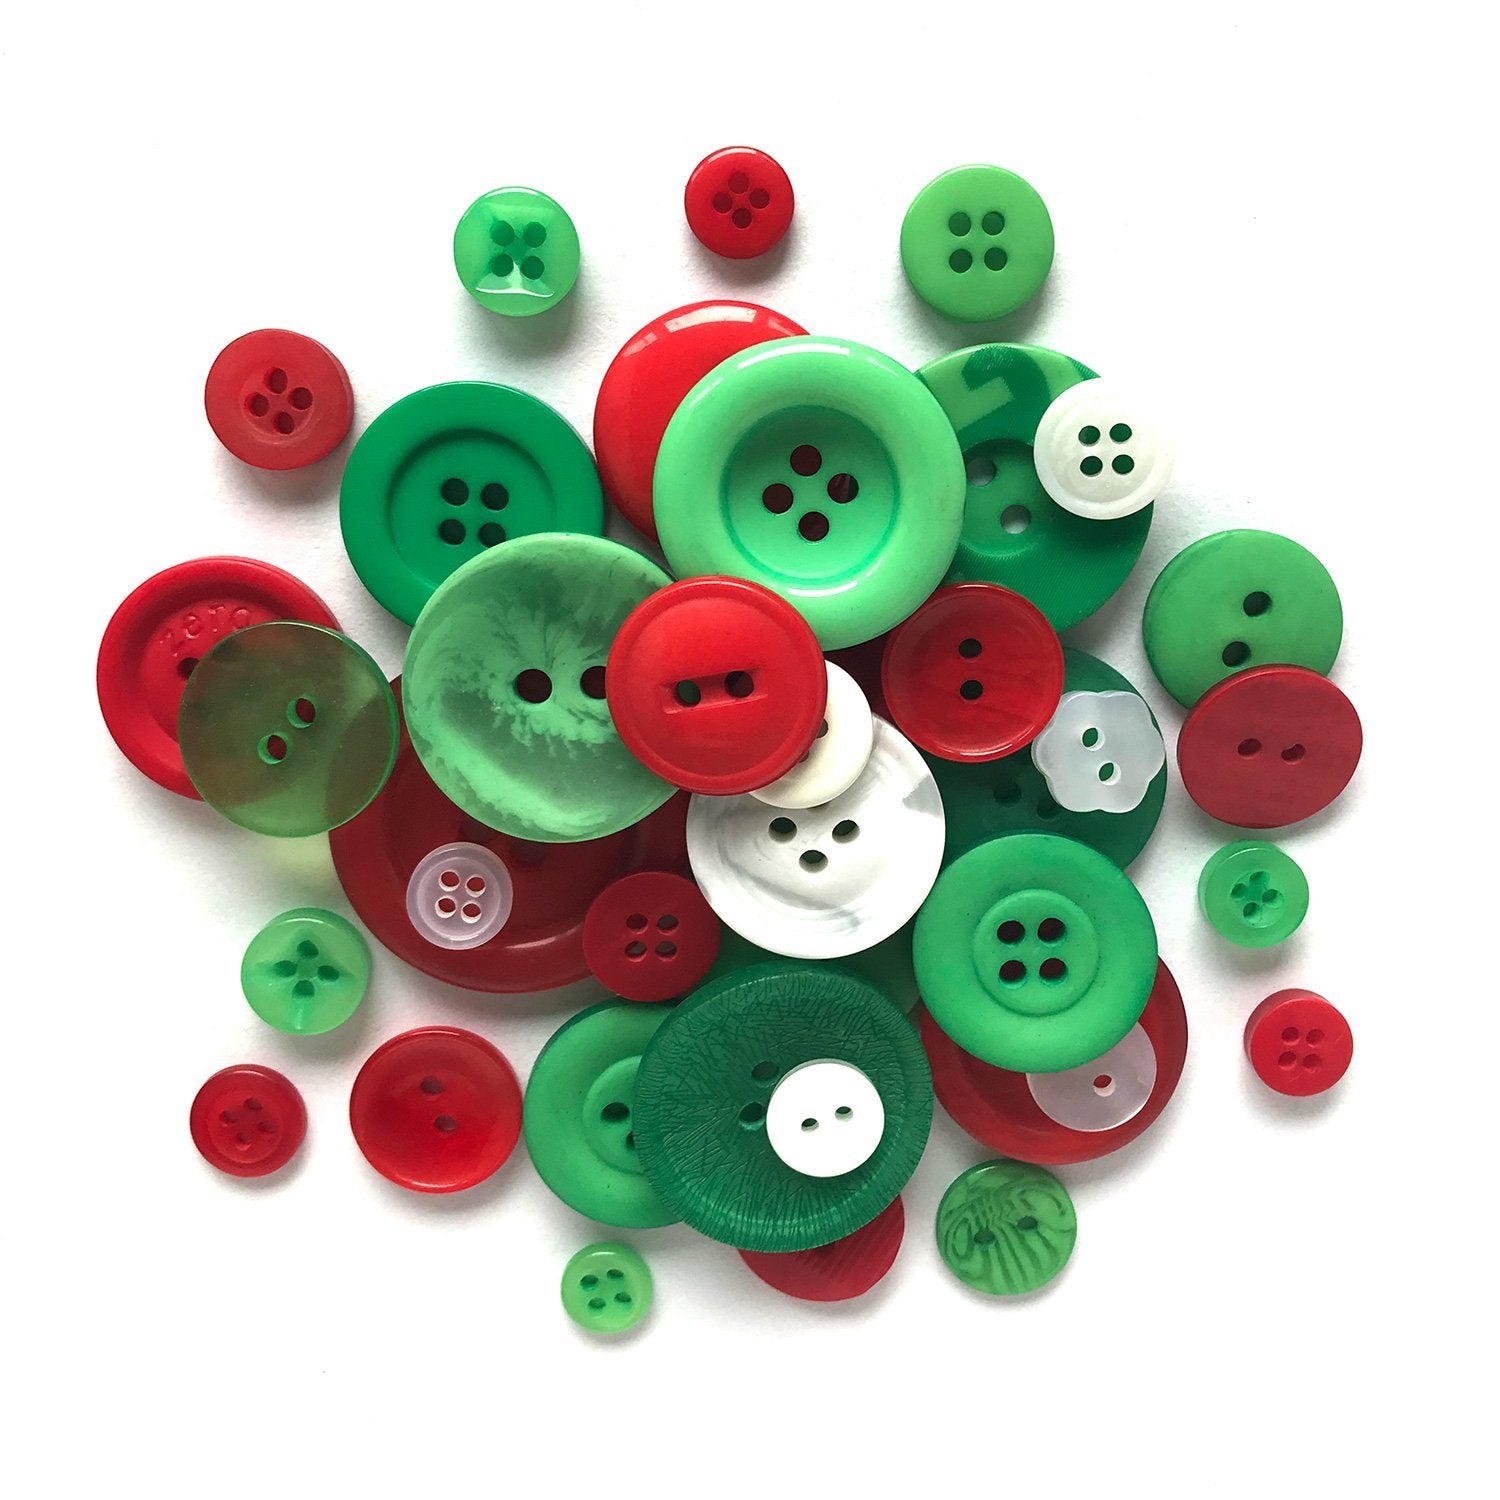 Buttons Galore 40+ Assorted Christmas Buttons for Sewing & Crafts - Set of 6 Button Packs